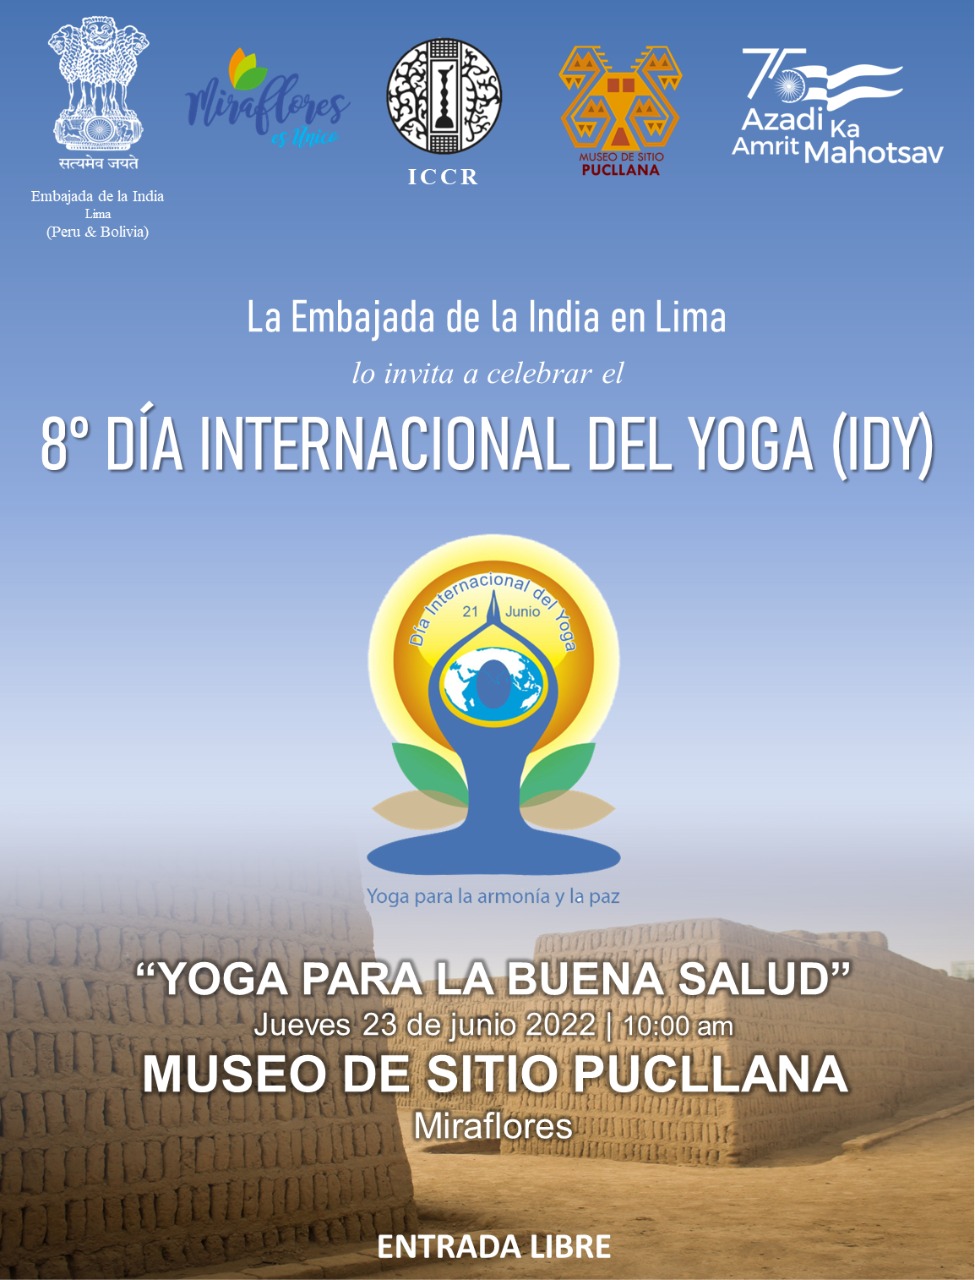 Celebration of 8th International Day of Yoga 2022 - Event organised in Huaca Pucllana